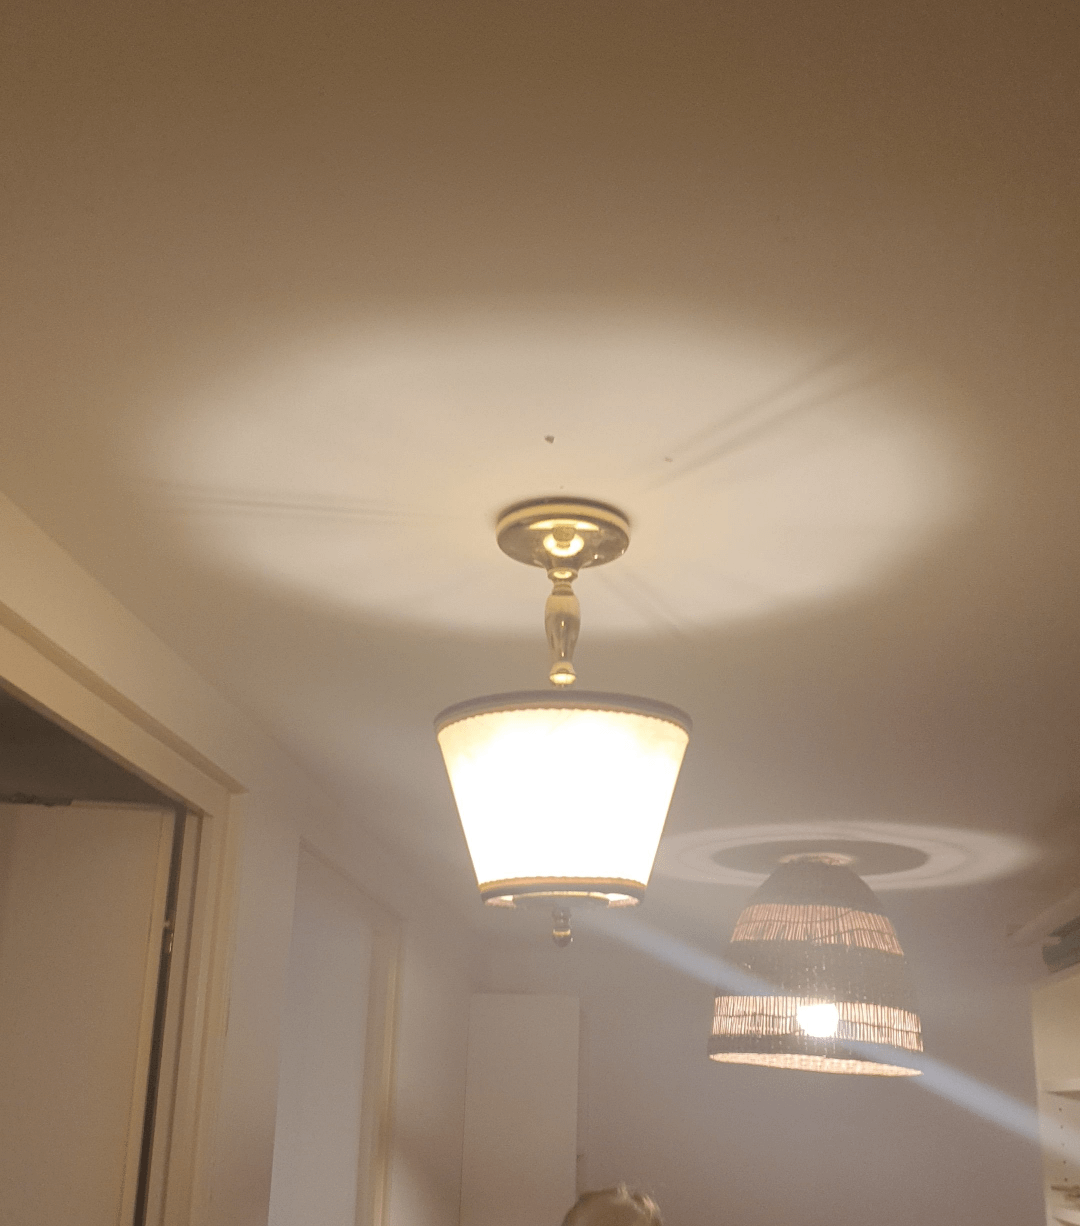 A table lamp upside down and being used as a chandelier